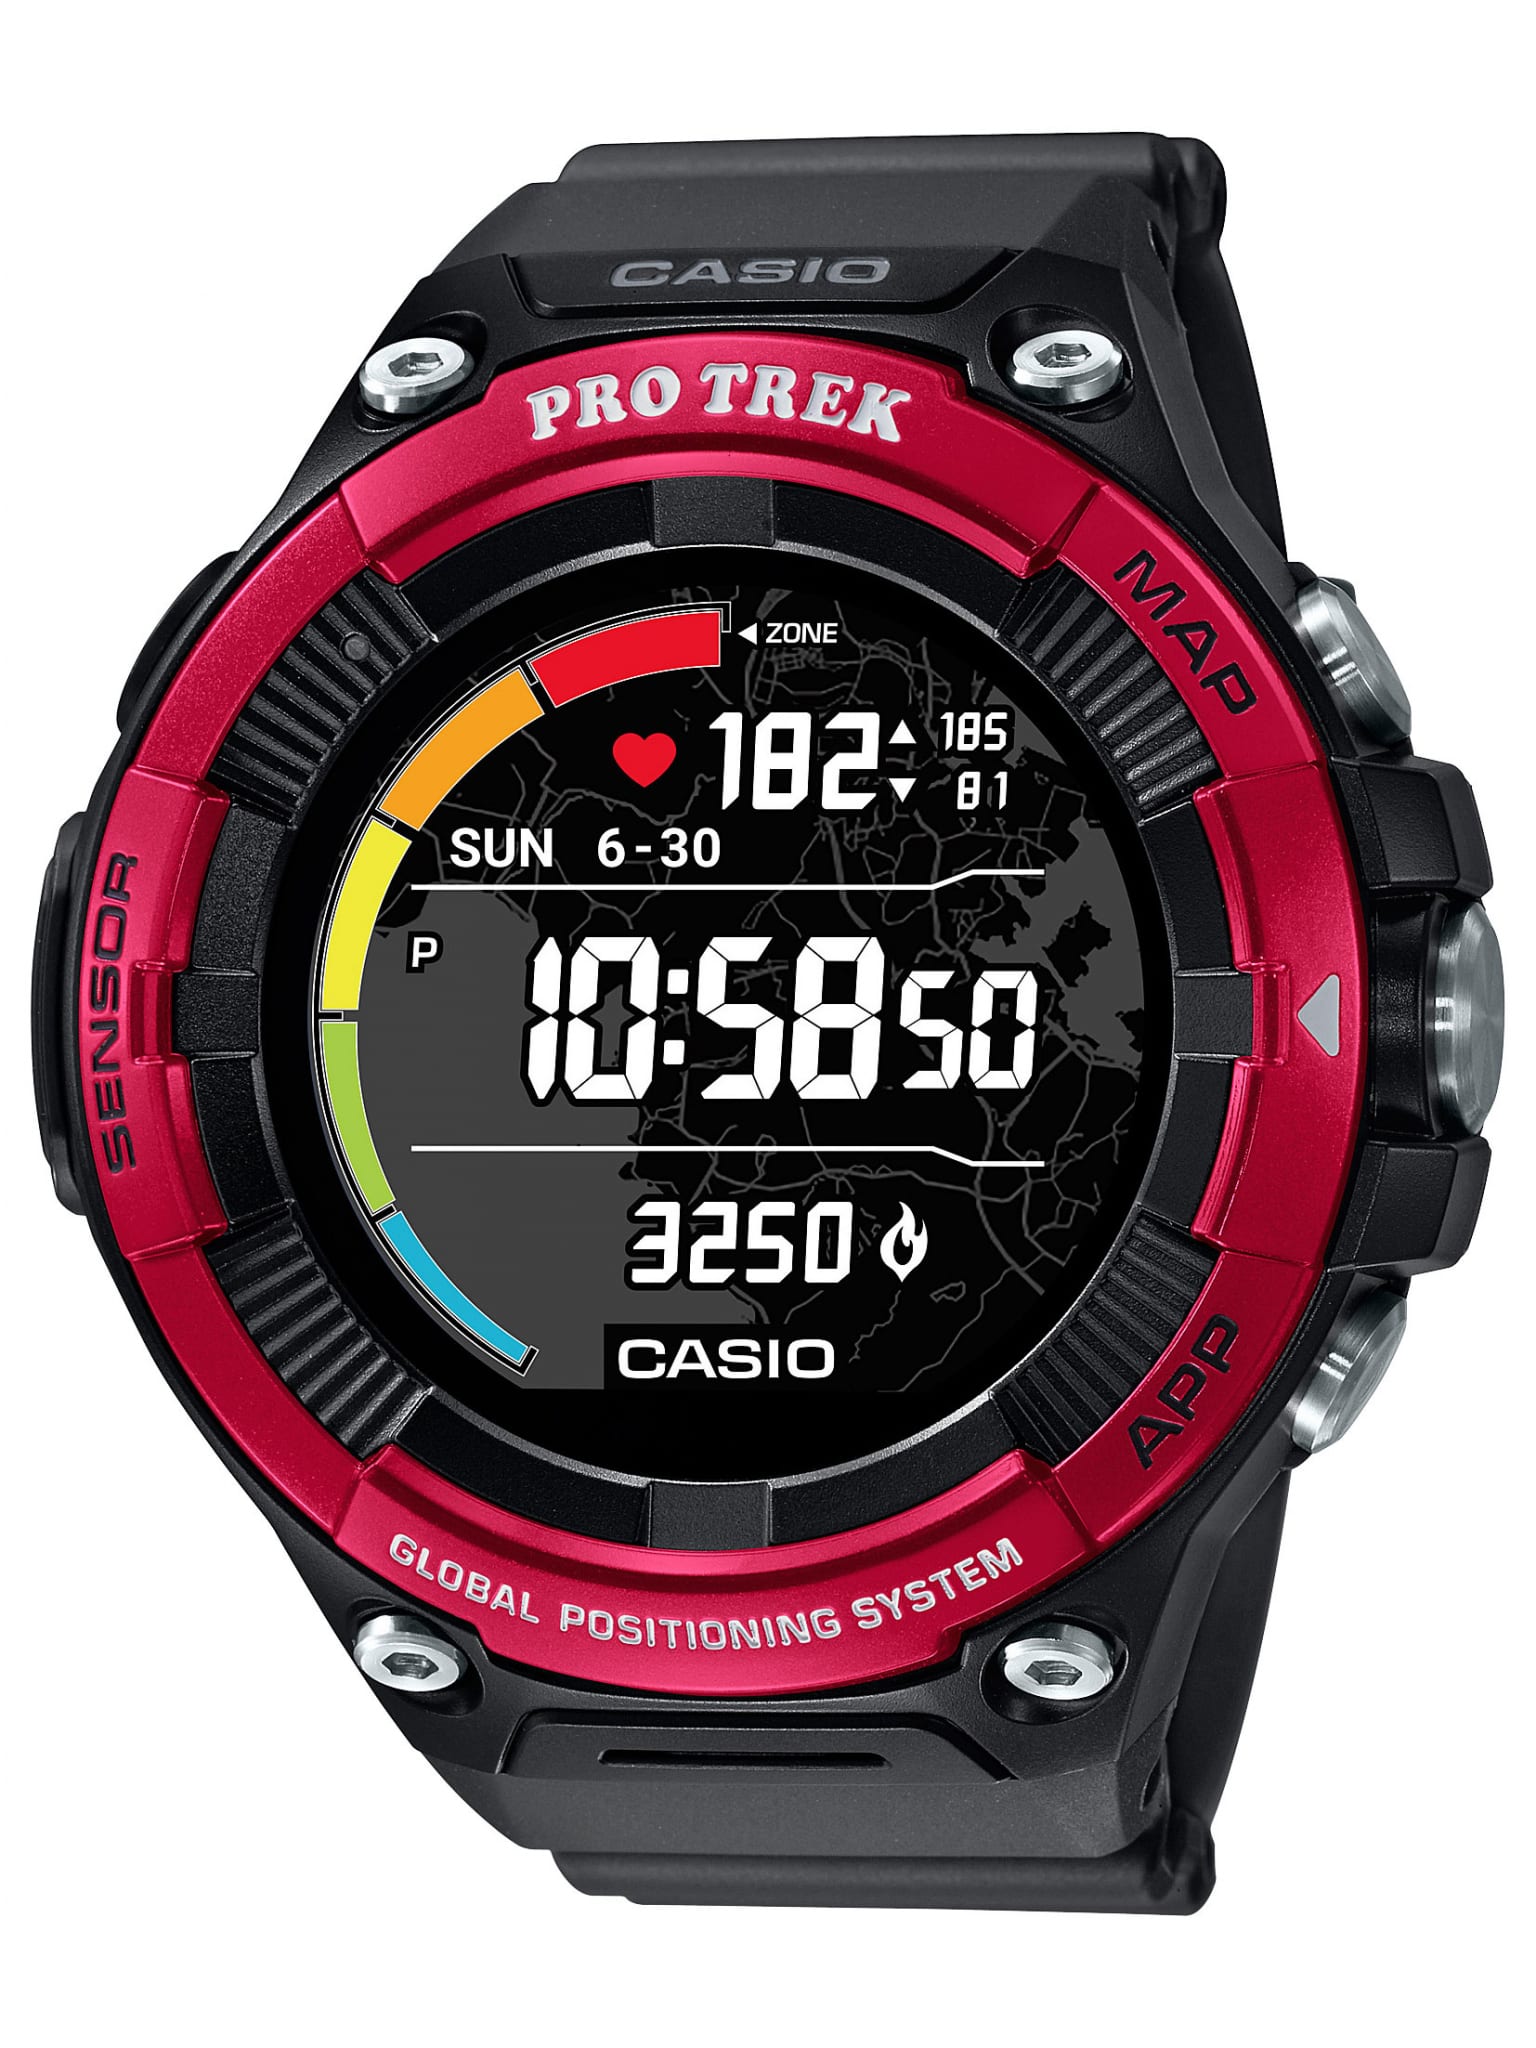 Casio Improves Popular Fitness Tracking And Mapping For Its Latest